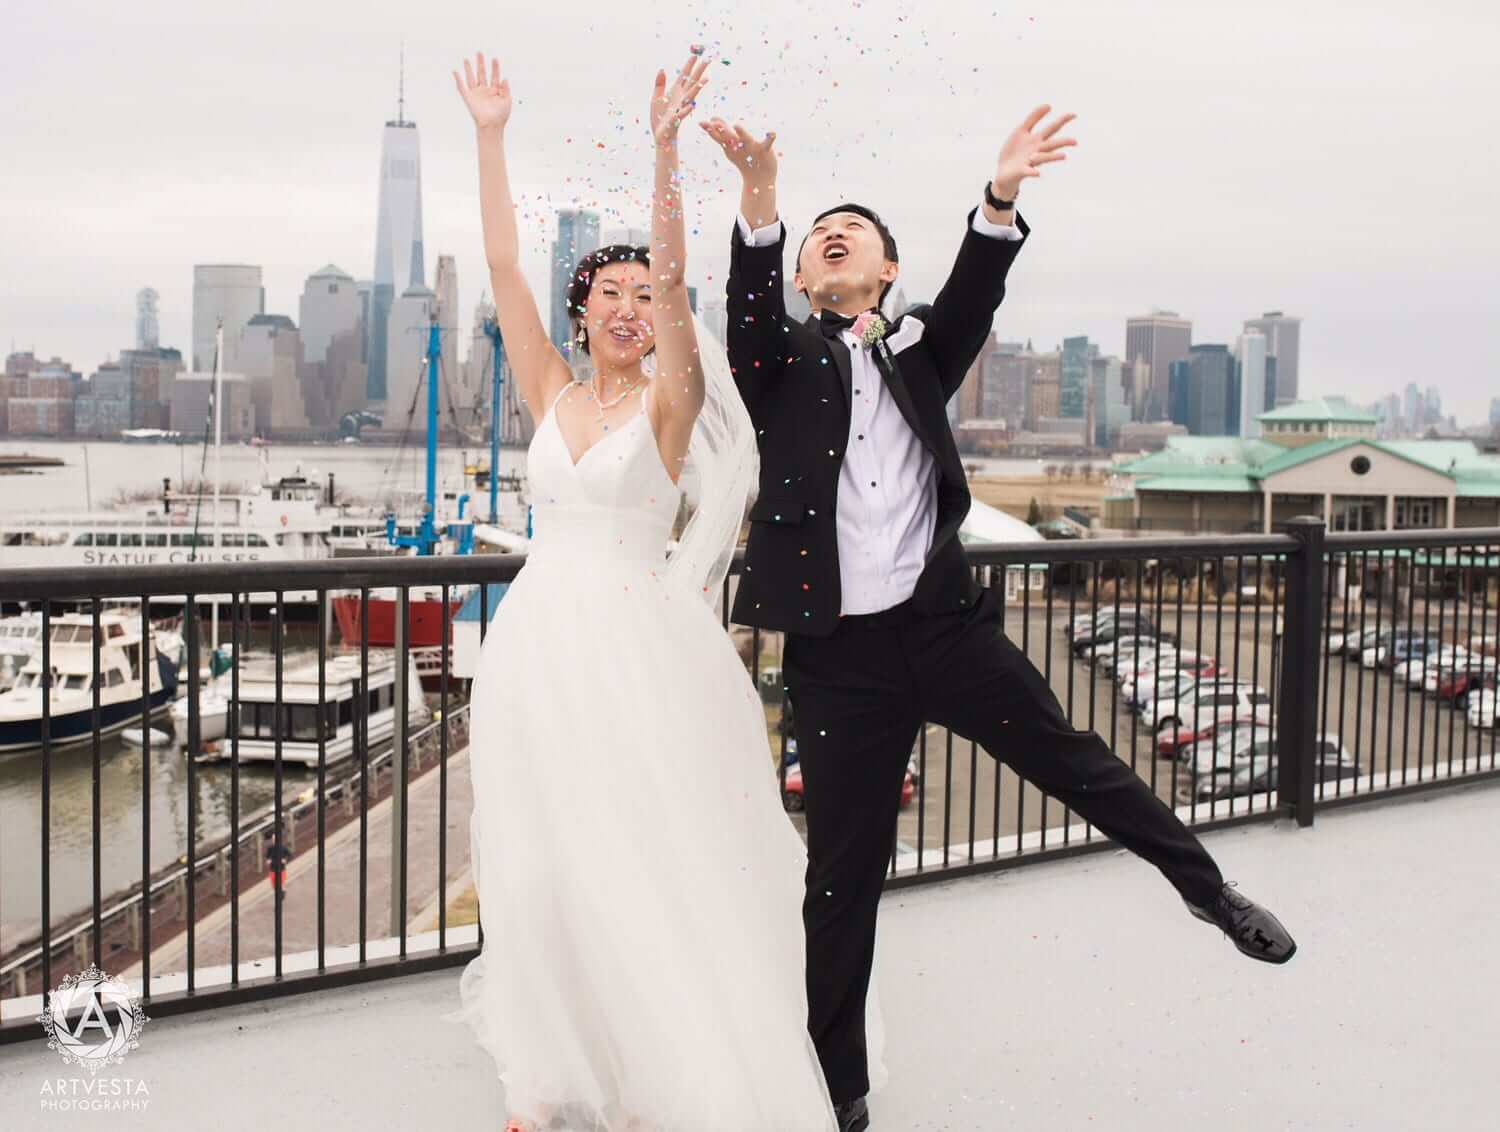 A joyful bride and groom jumping and throwing confetti on a rooftop with a city skyline in the background.